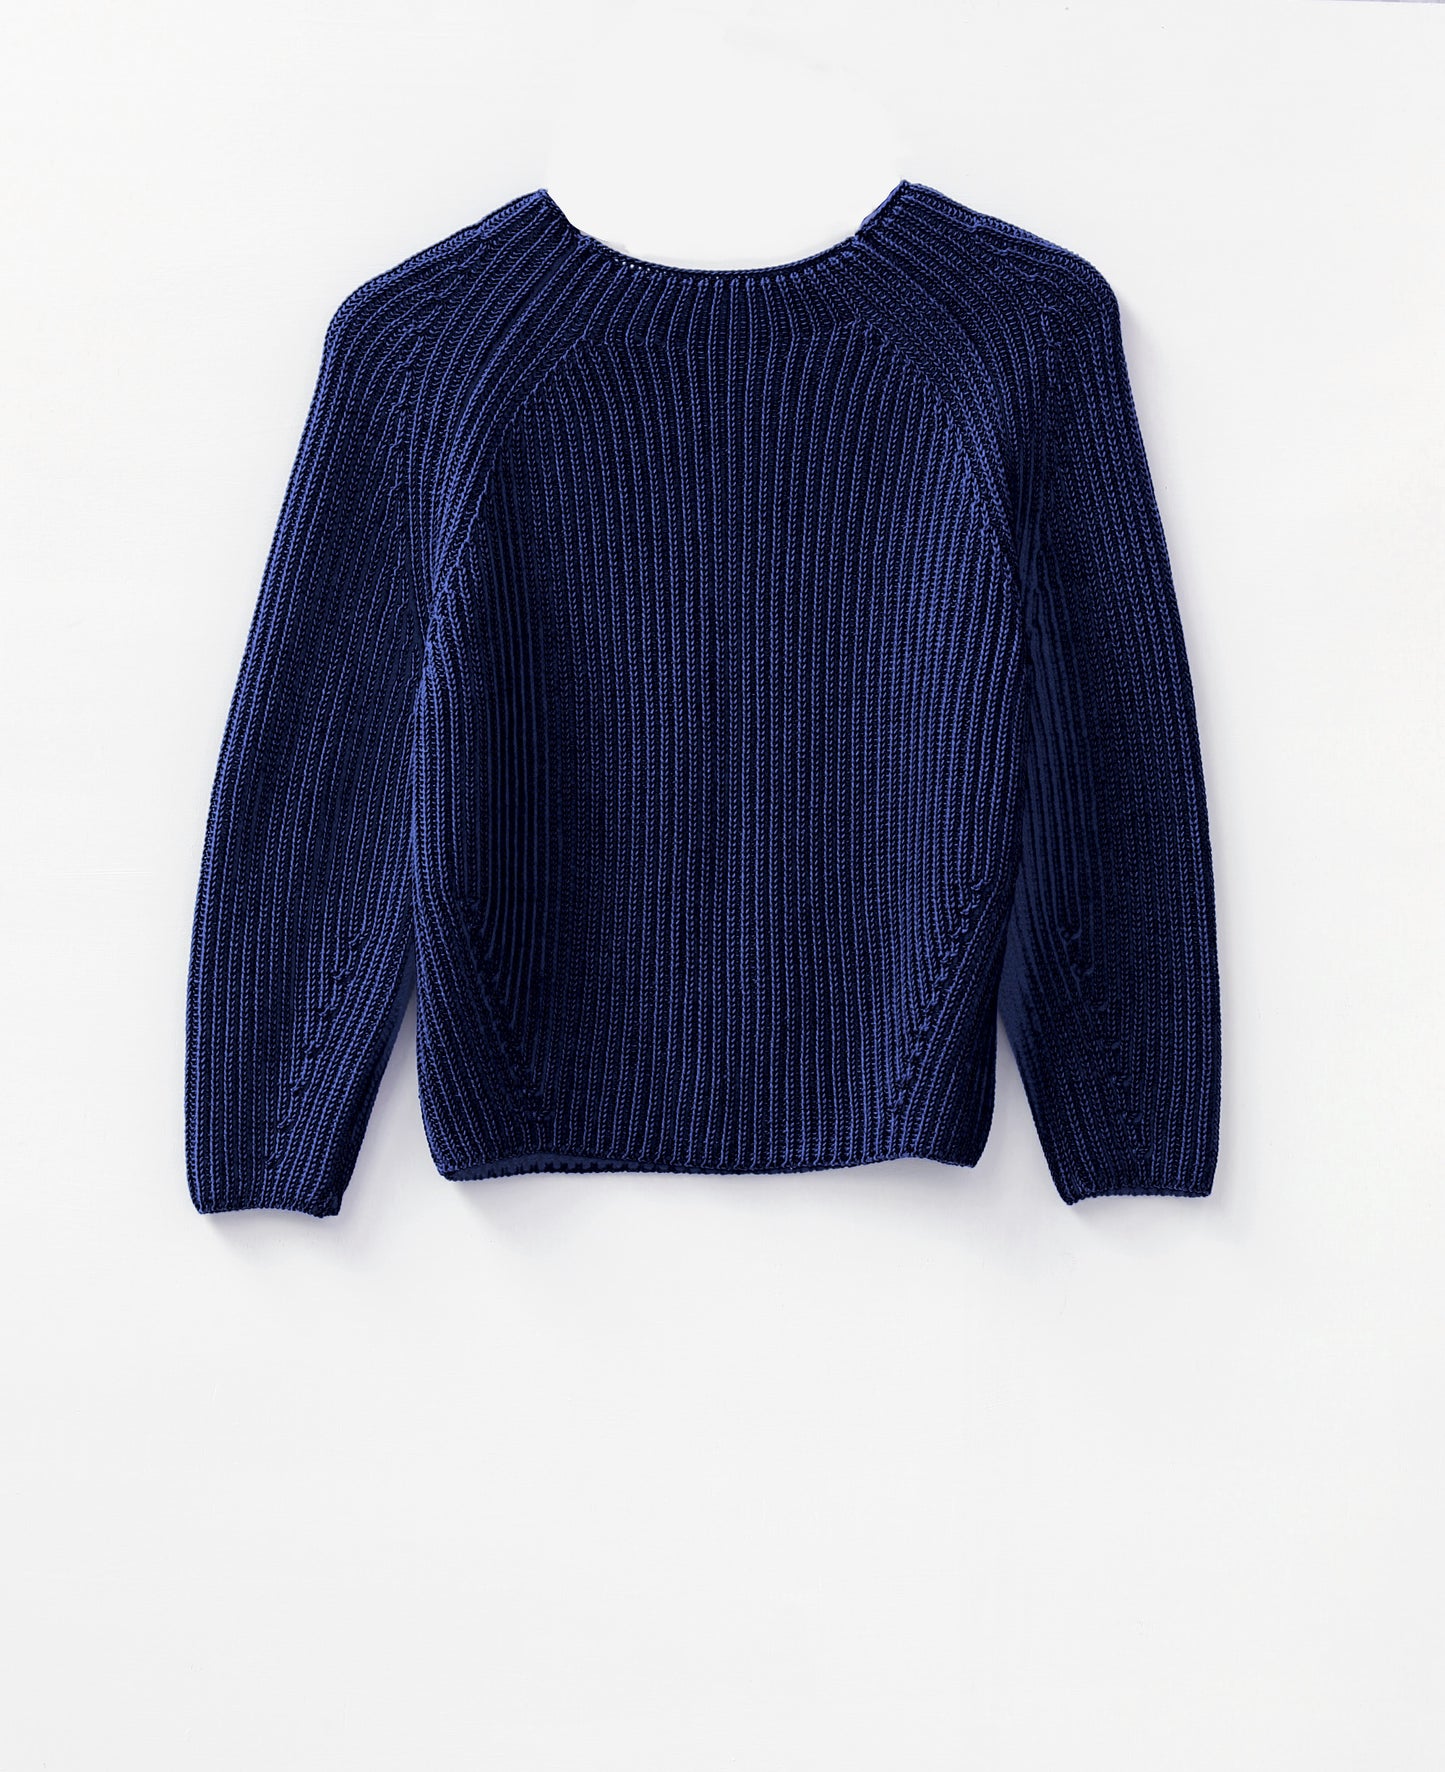 The Claife Organic Cotton Fisherman Rib Sweater in French Navy